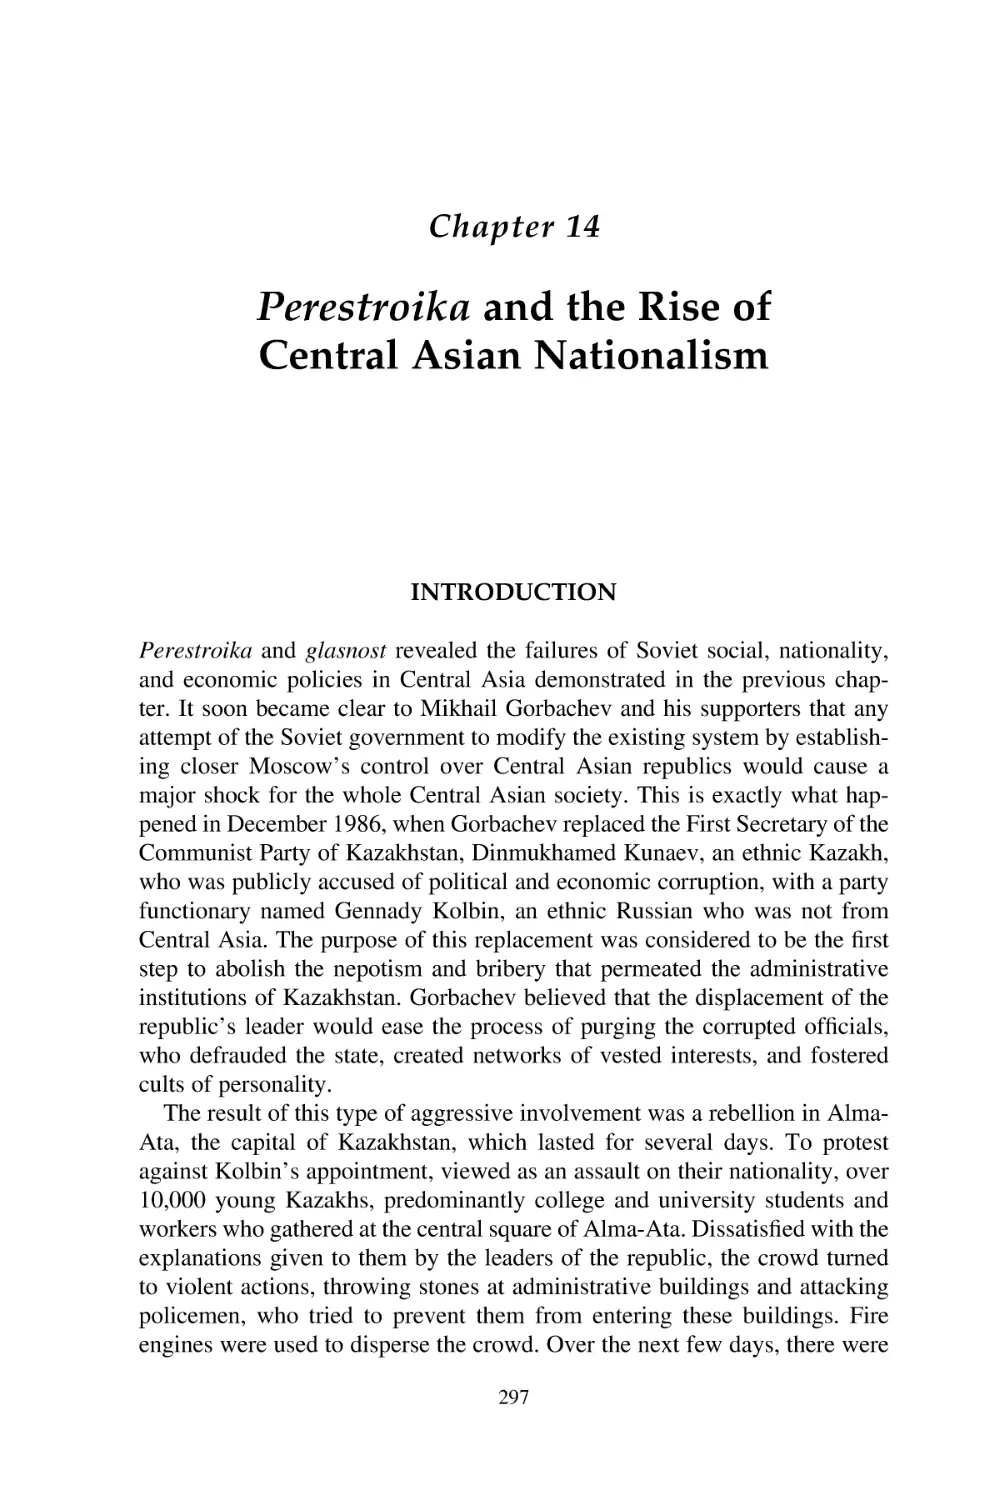 14. Perestroika and the Rise of Central Asian Nationalism